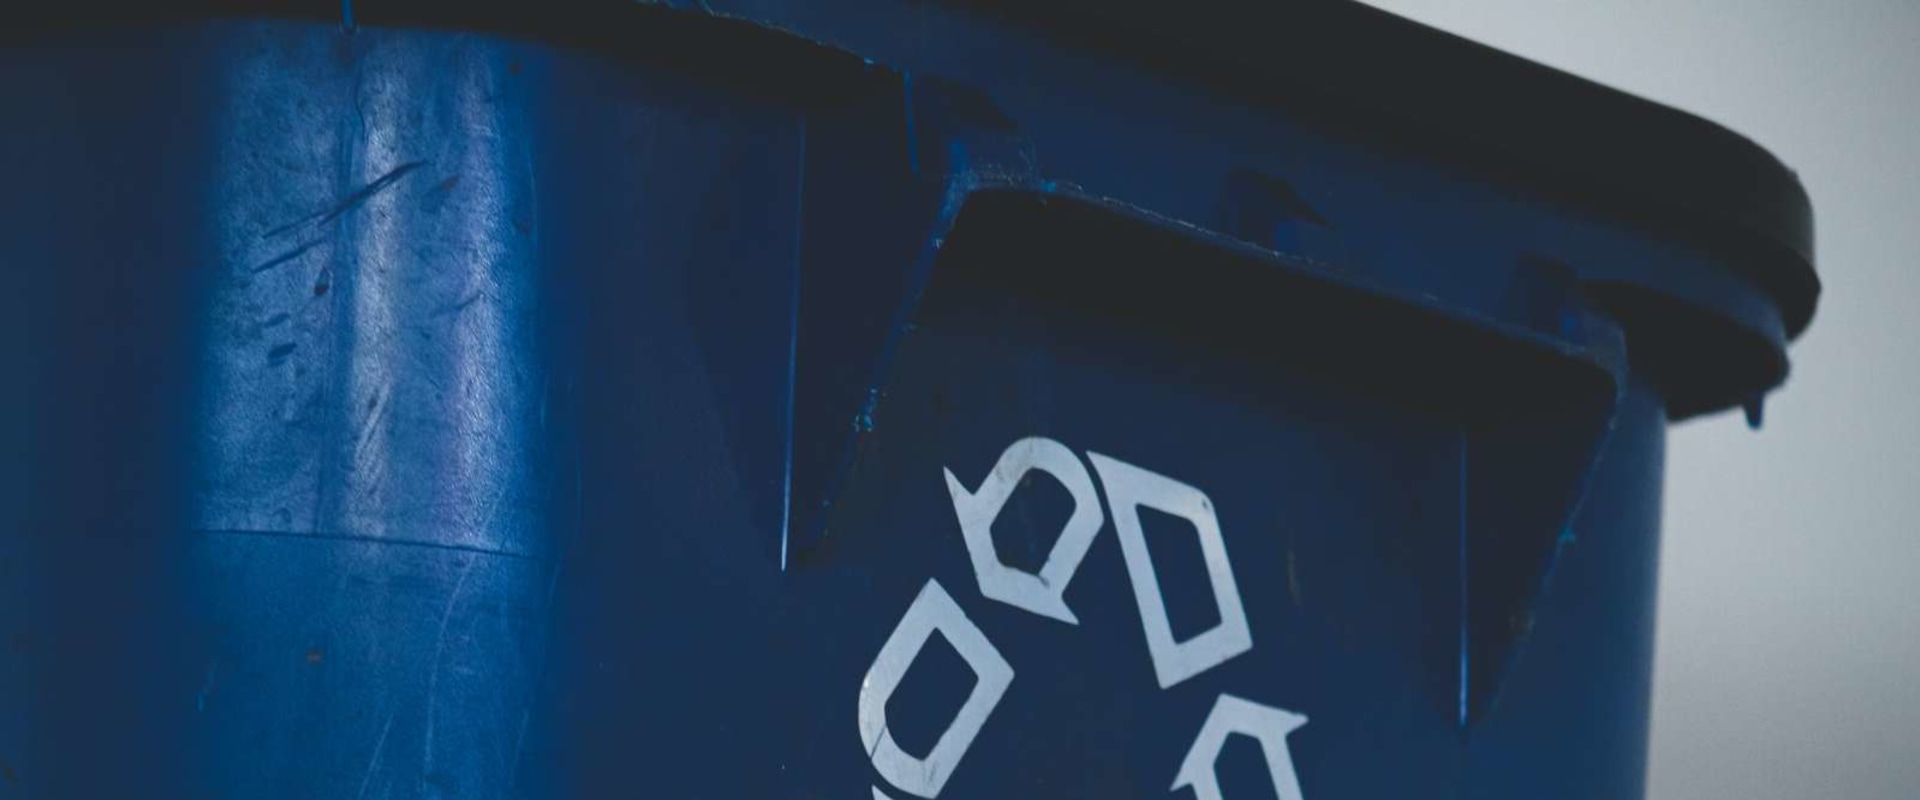 The Comprehensive Waste Management Policies in Fairfax County, VA